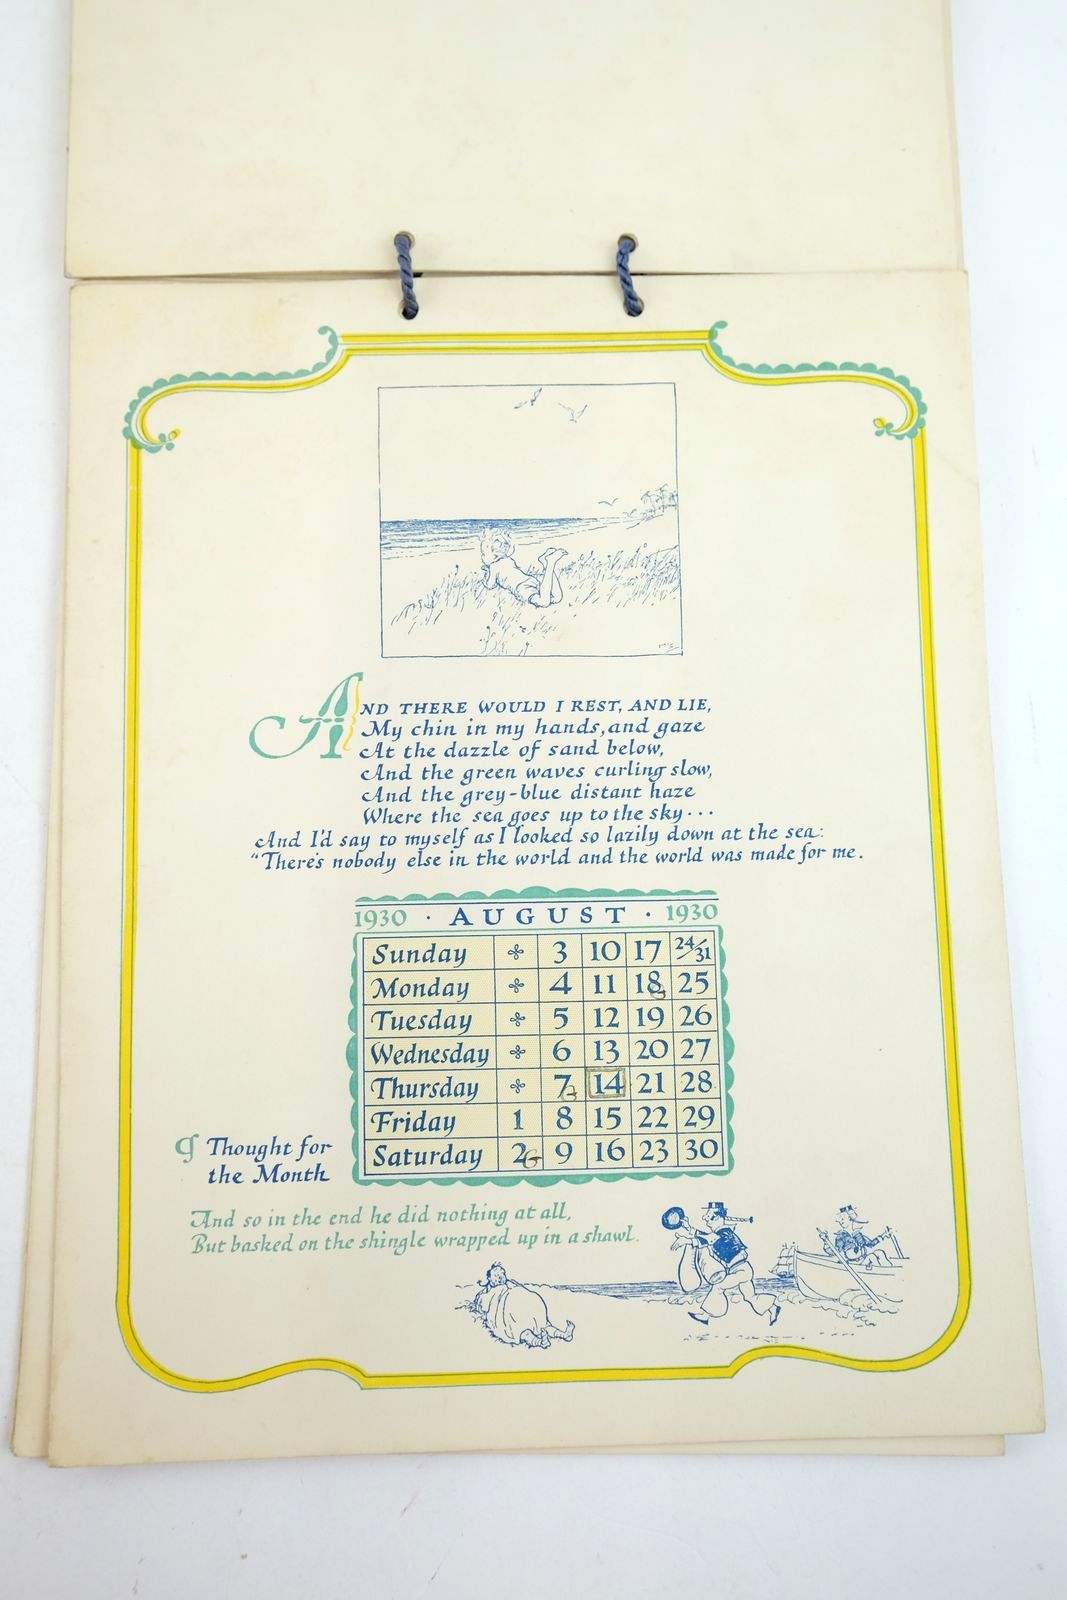 Photo of THE VERY YOUNG CALENDAR 1930 written by Milne, A.A. illustrated by Shepard, E.H. published by Methuen & Co. Ltd. (STOCK CODE: 1319131)  for sale by Stella & Rose's Books